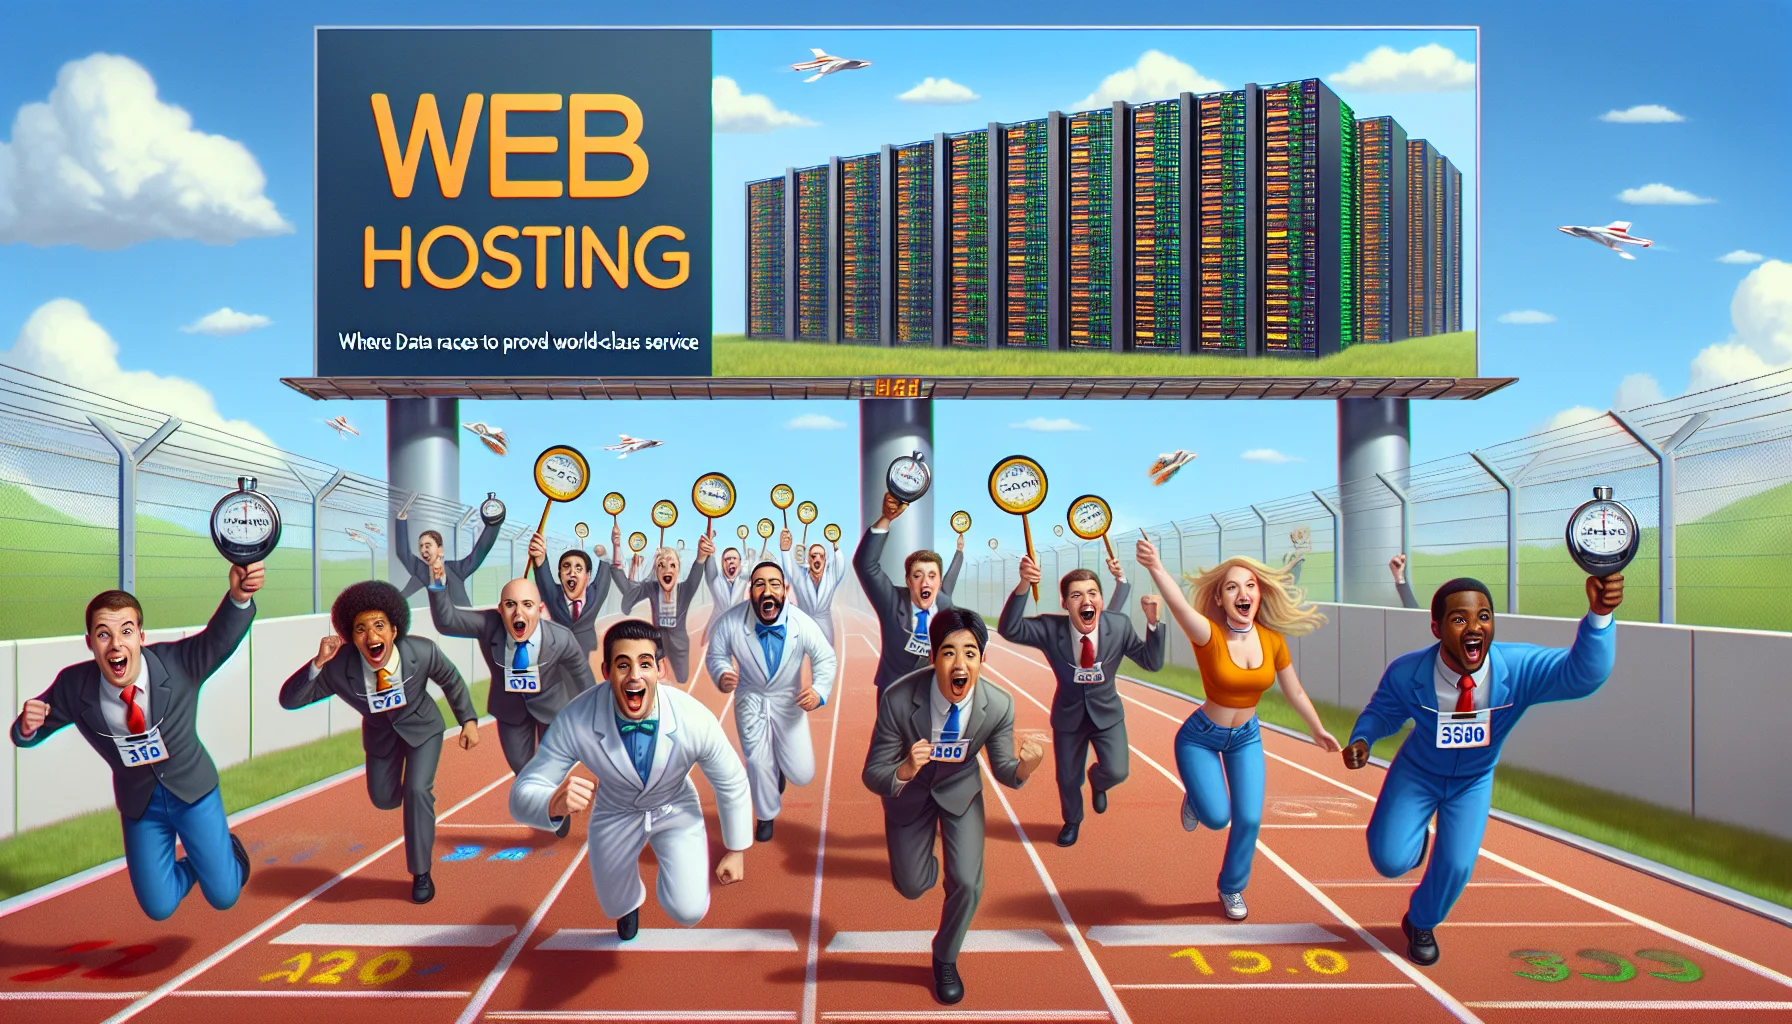 Generate an image showcasing a humorous scene related to web hosting, designed to elicit interest in web hosting services. Visualize a group of colourful data packets racing on a track towards a towering server building, cheering wildly as they approach the finish line. A multinational collection of IT workers, presenting a variety of genders and descents like Hispanic, Middle-Eastern, South Asian, and Black, are keeping track of the race, holding stopwatches, shaking their heads in amazement. On a billboard, write 'Web Hosting - Where Data Races to Provide World-class Service'.